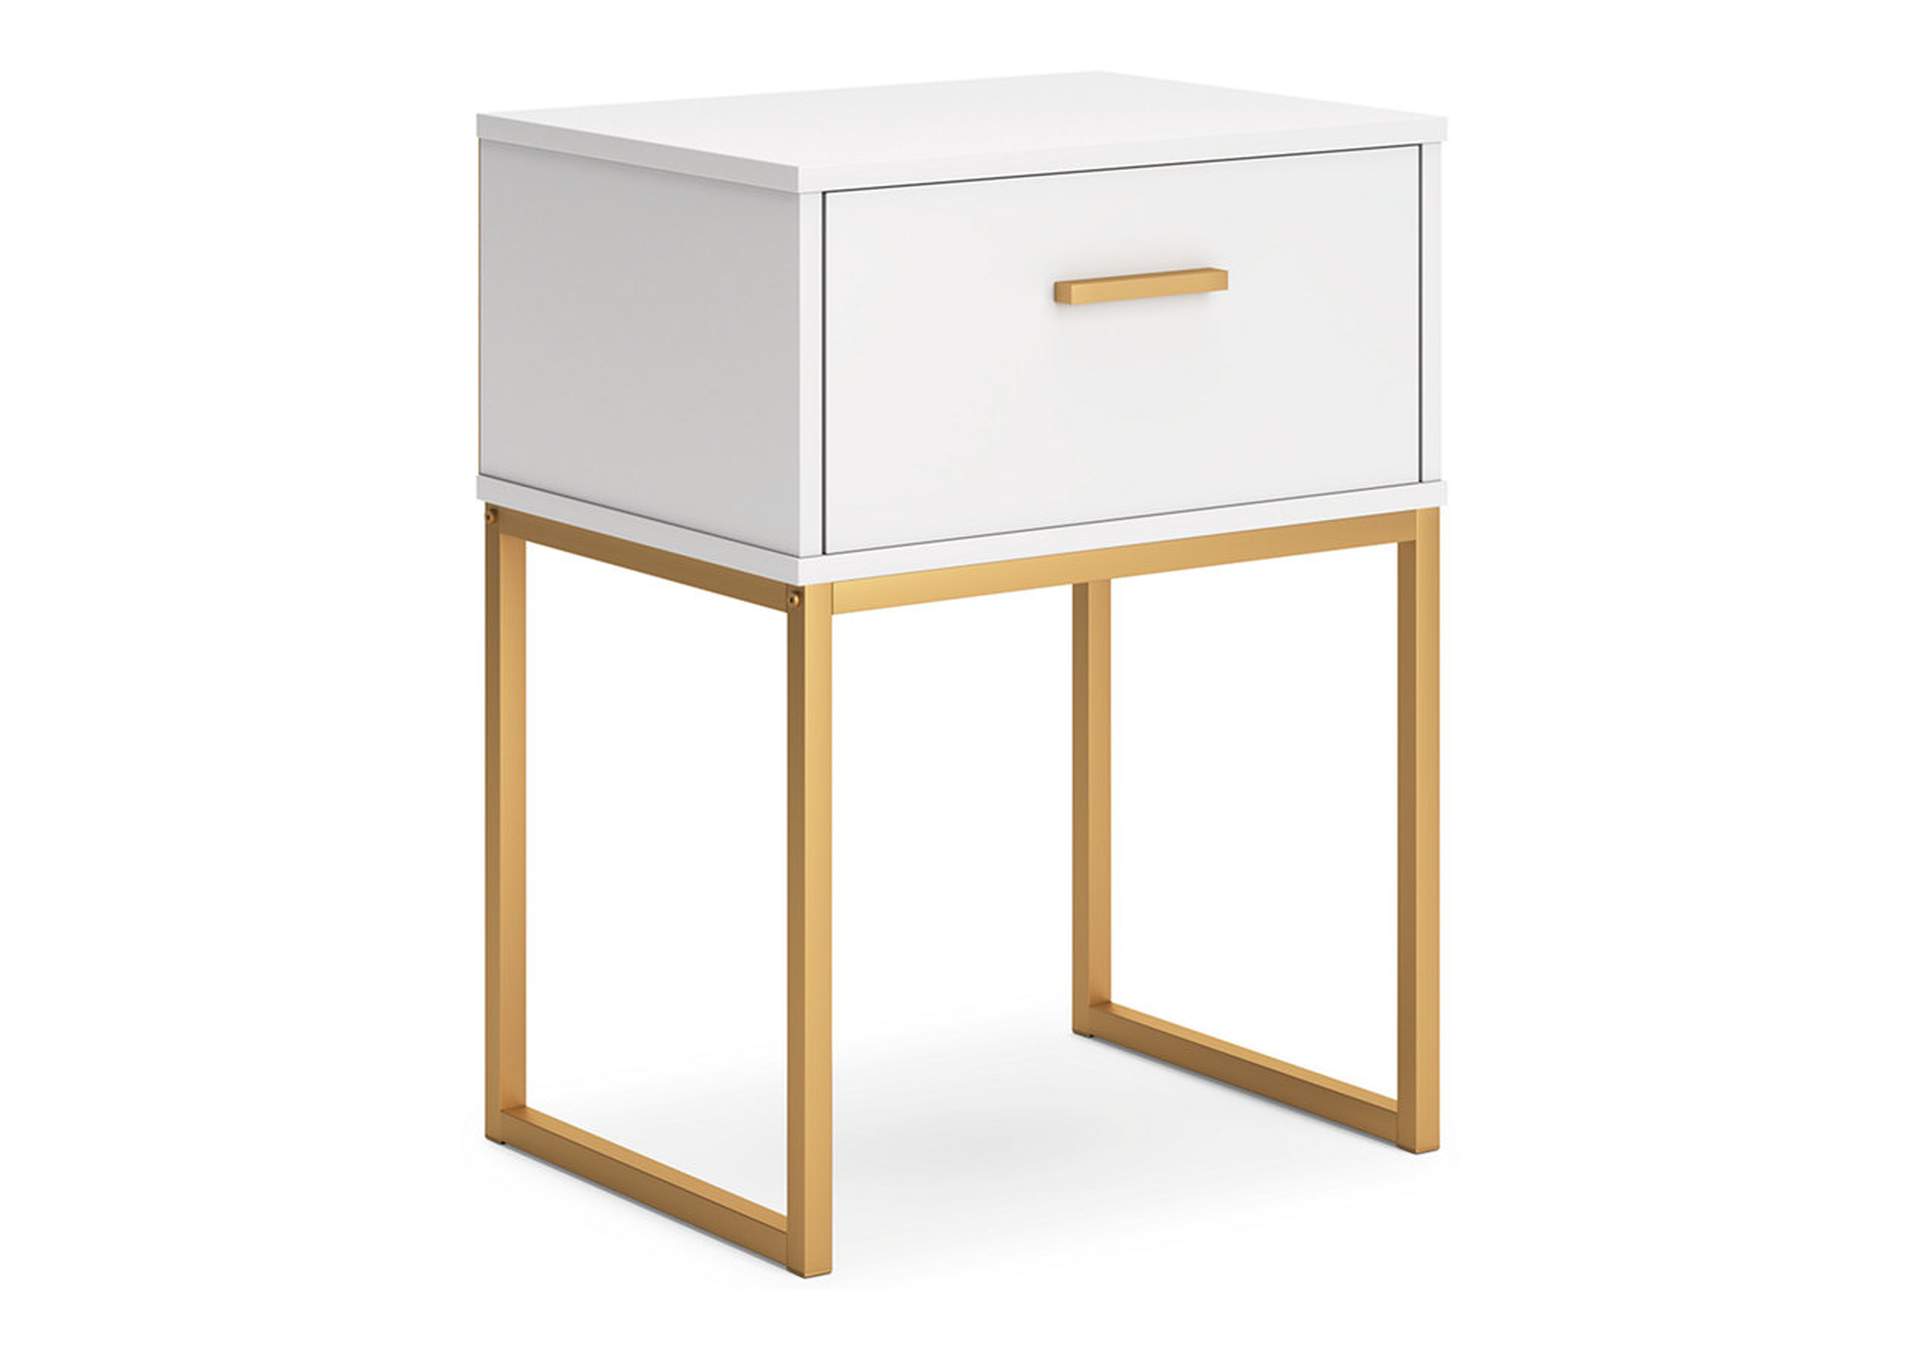 Socalle Nightstand,Signature Design By Ashley